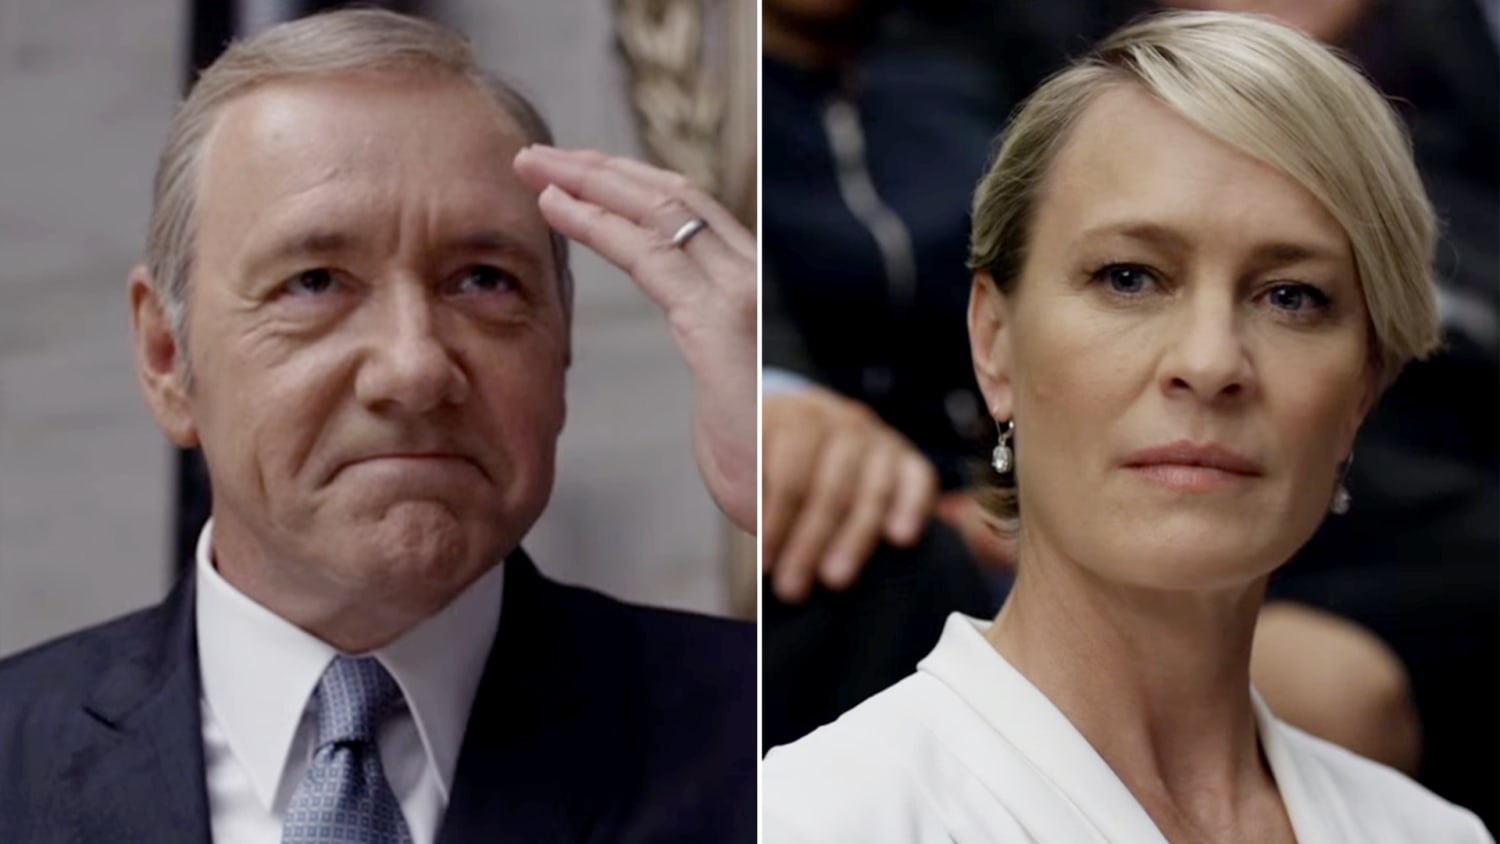 'House of Cards' Season 4 trailer: Frank and Claire Underwood are at war - TODAY.com